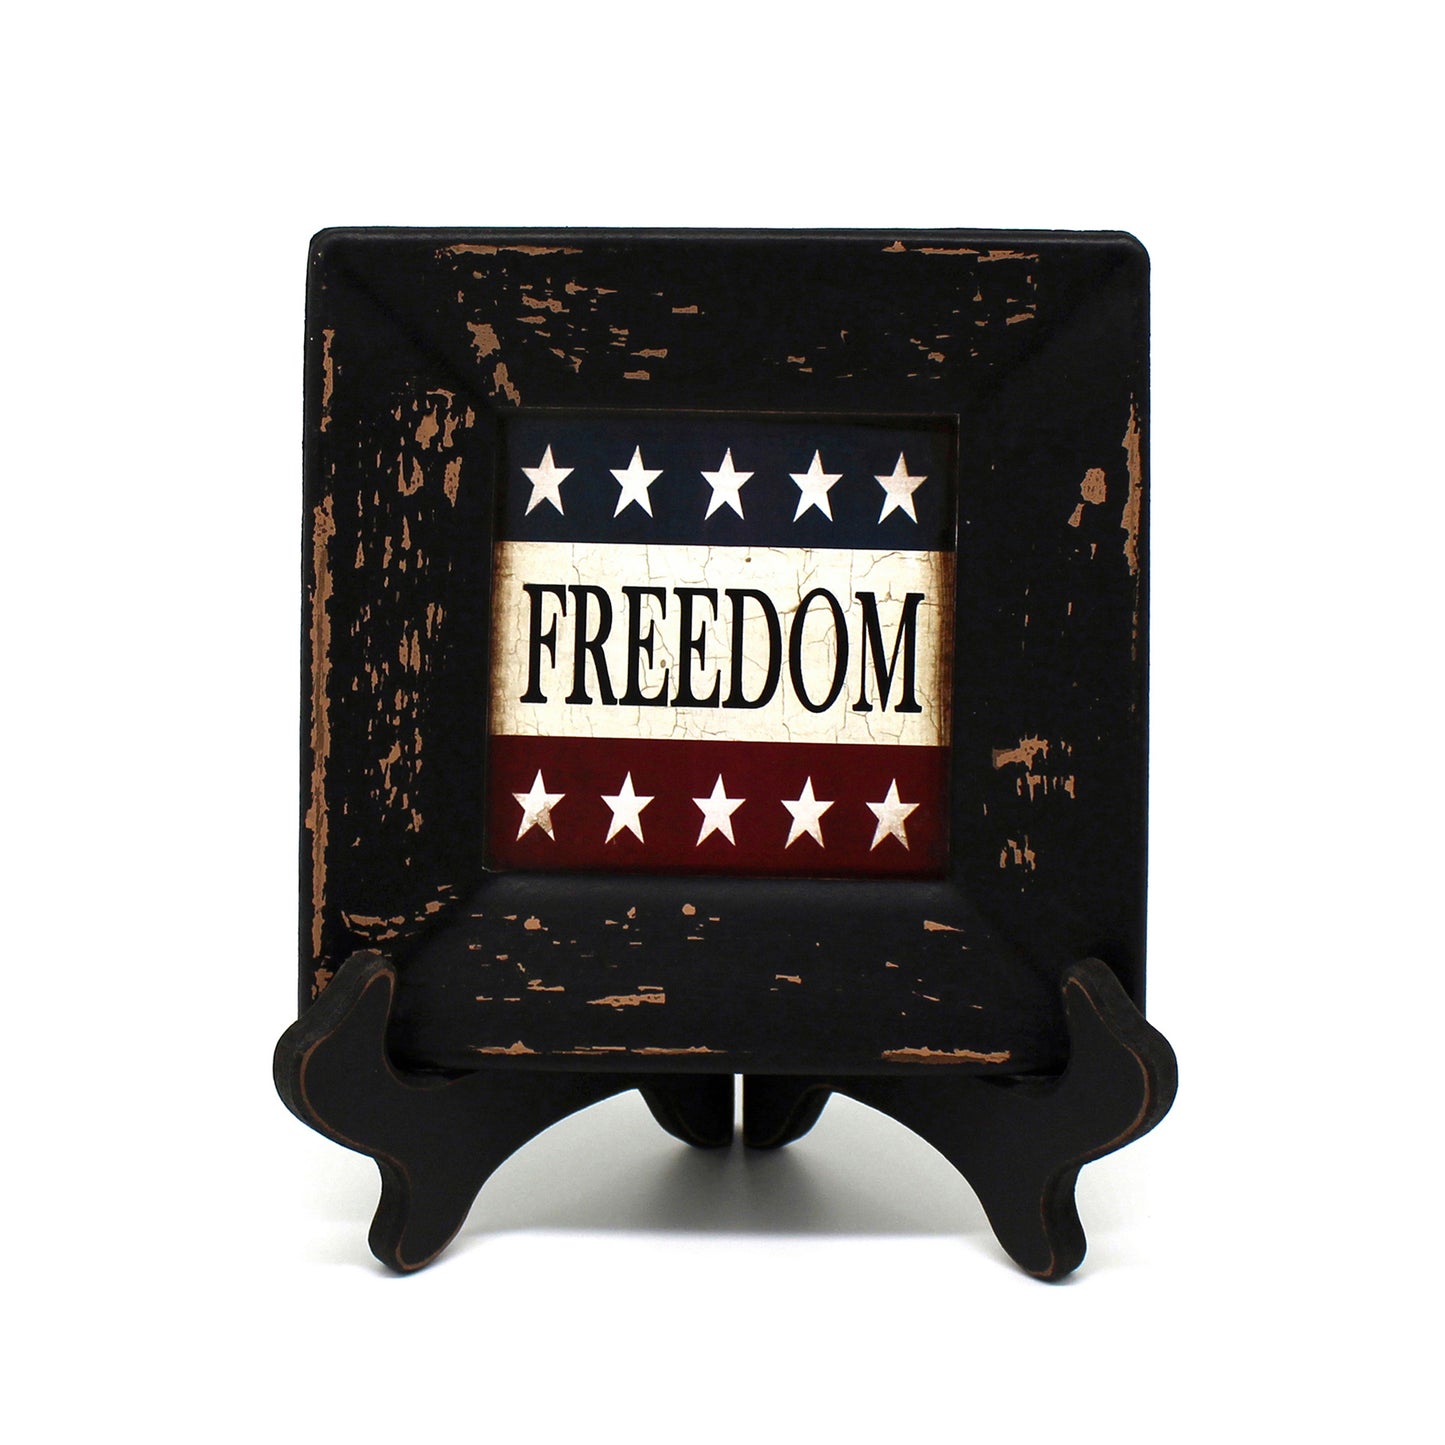 CVHOMEDECO. Primitives Antique American Flag Decorated Plate with Rack Square Display Wooden Plate Home and Office Décor Art, 6 X 6 Inch